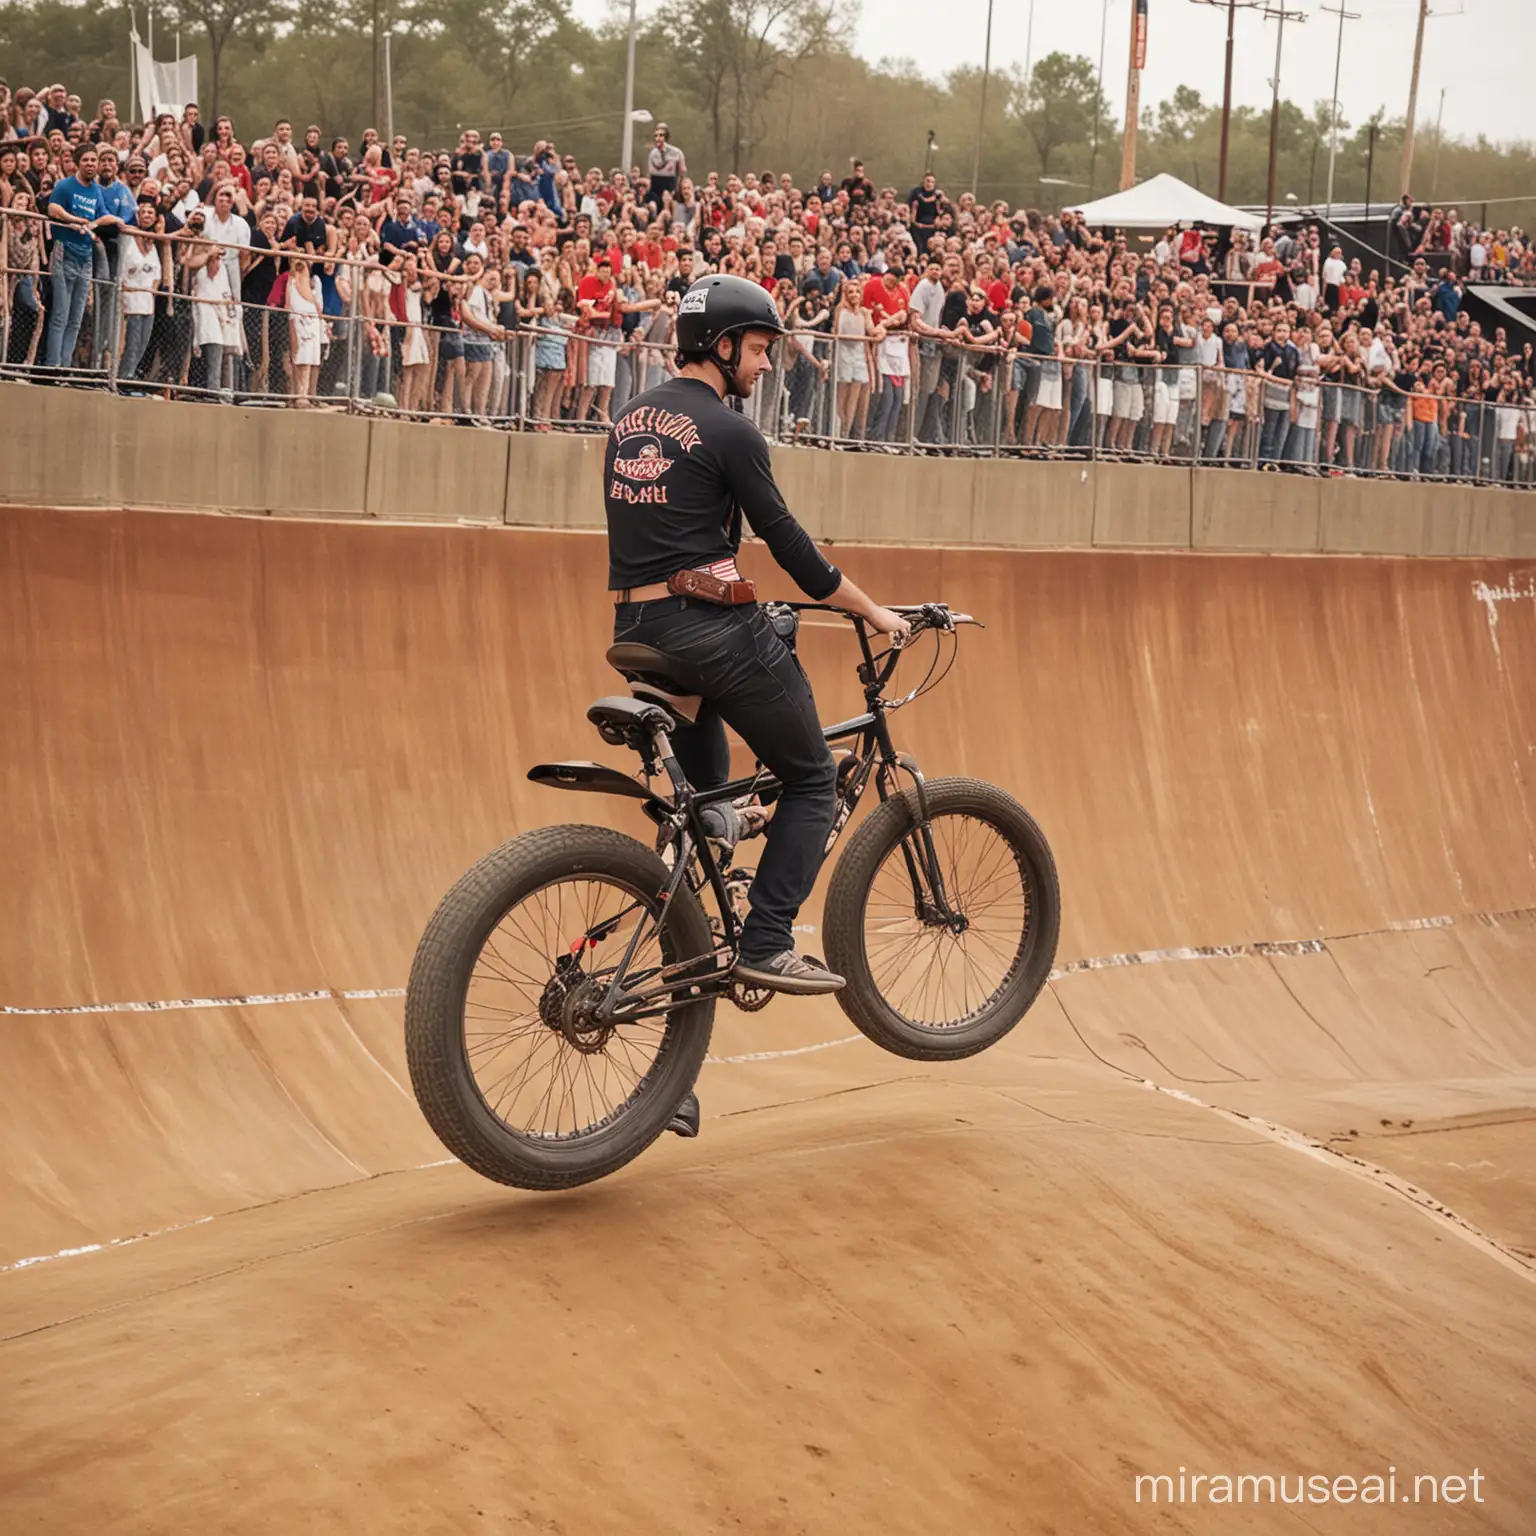 owen stanley travis riding the wall of death